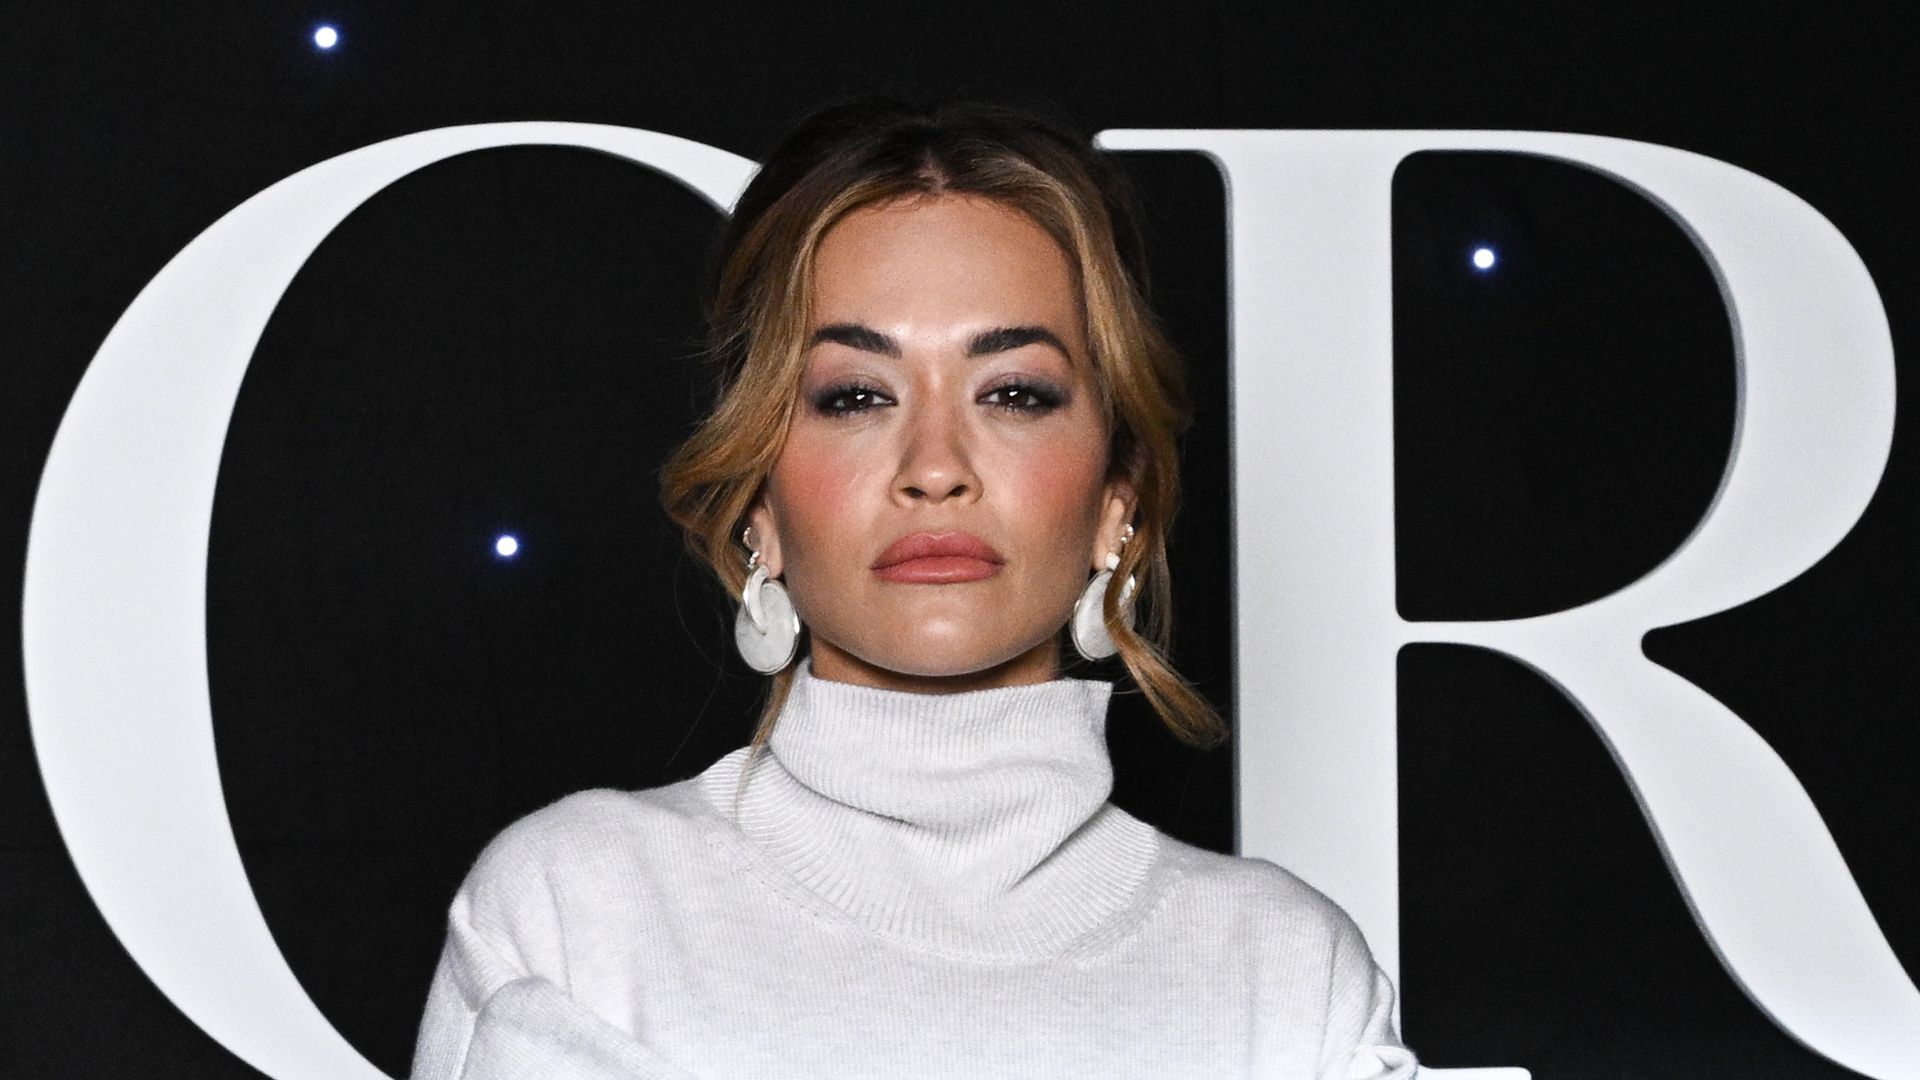 PARIS, FRANCE - JANUARY 19: (EDITORIAL USE ONLY - For Non-Editorial use please seek approval from Fashion House) Rita Ora attends the Dior Homme Menswear Fall/Winter 2024-2025 show as part of Paris Fashion Week on January 19, 2024 in Paris, France. (Photo by Stephane Cardinale - Corbis/Corbis via Getty Images)